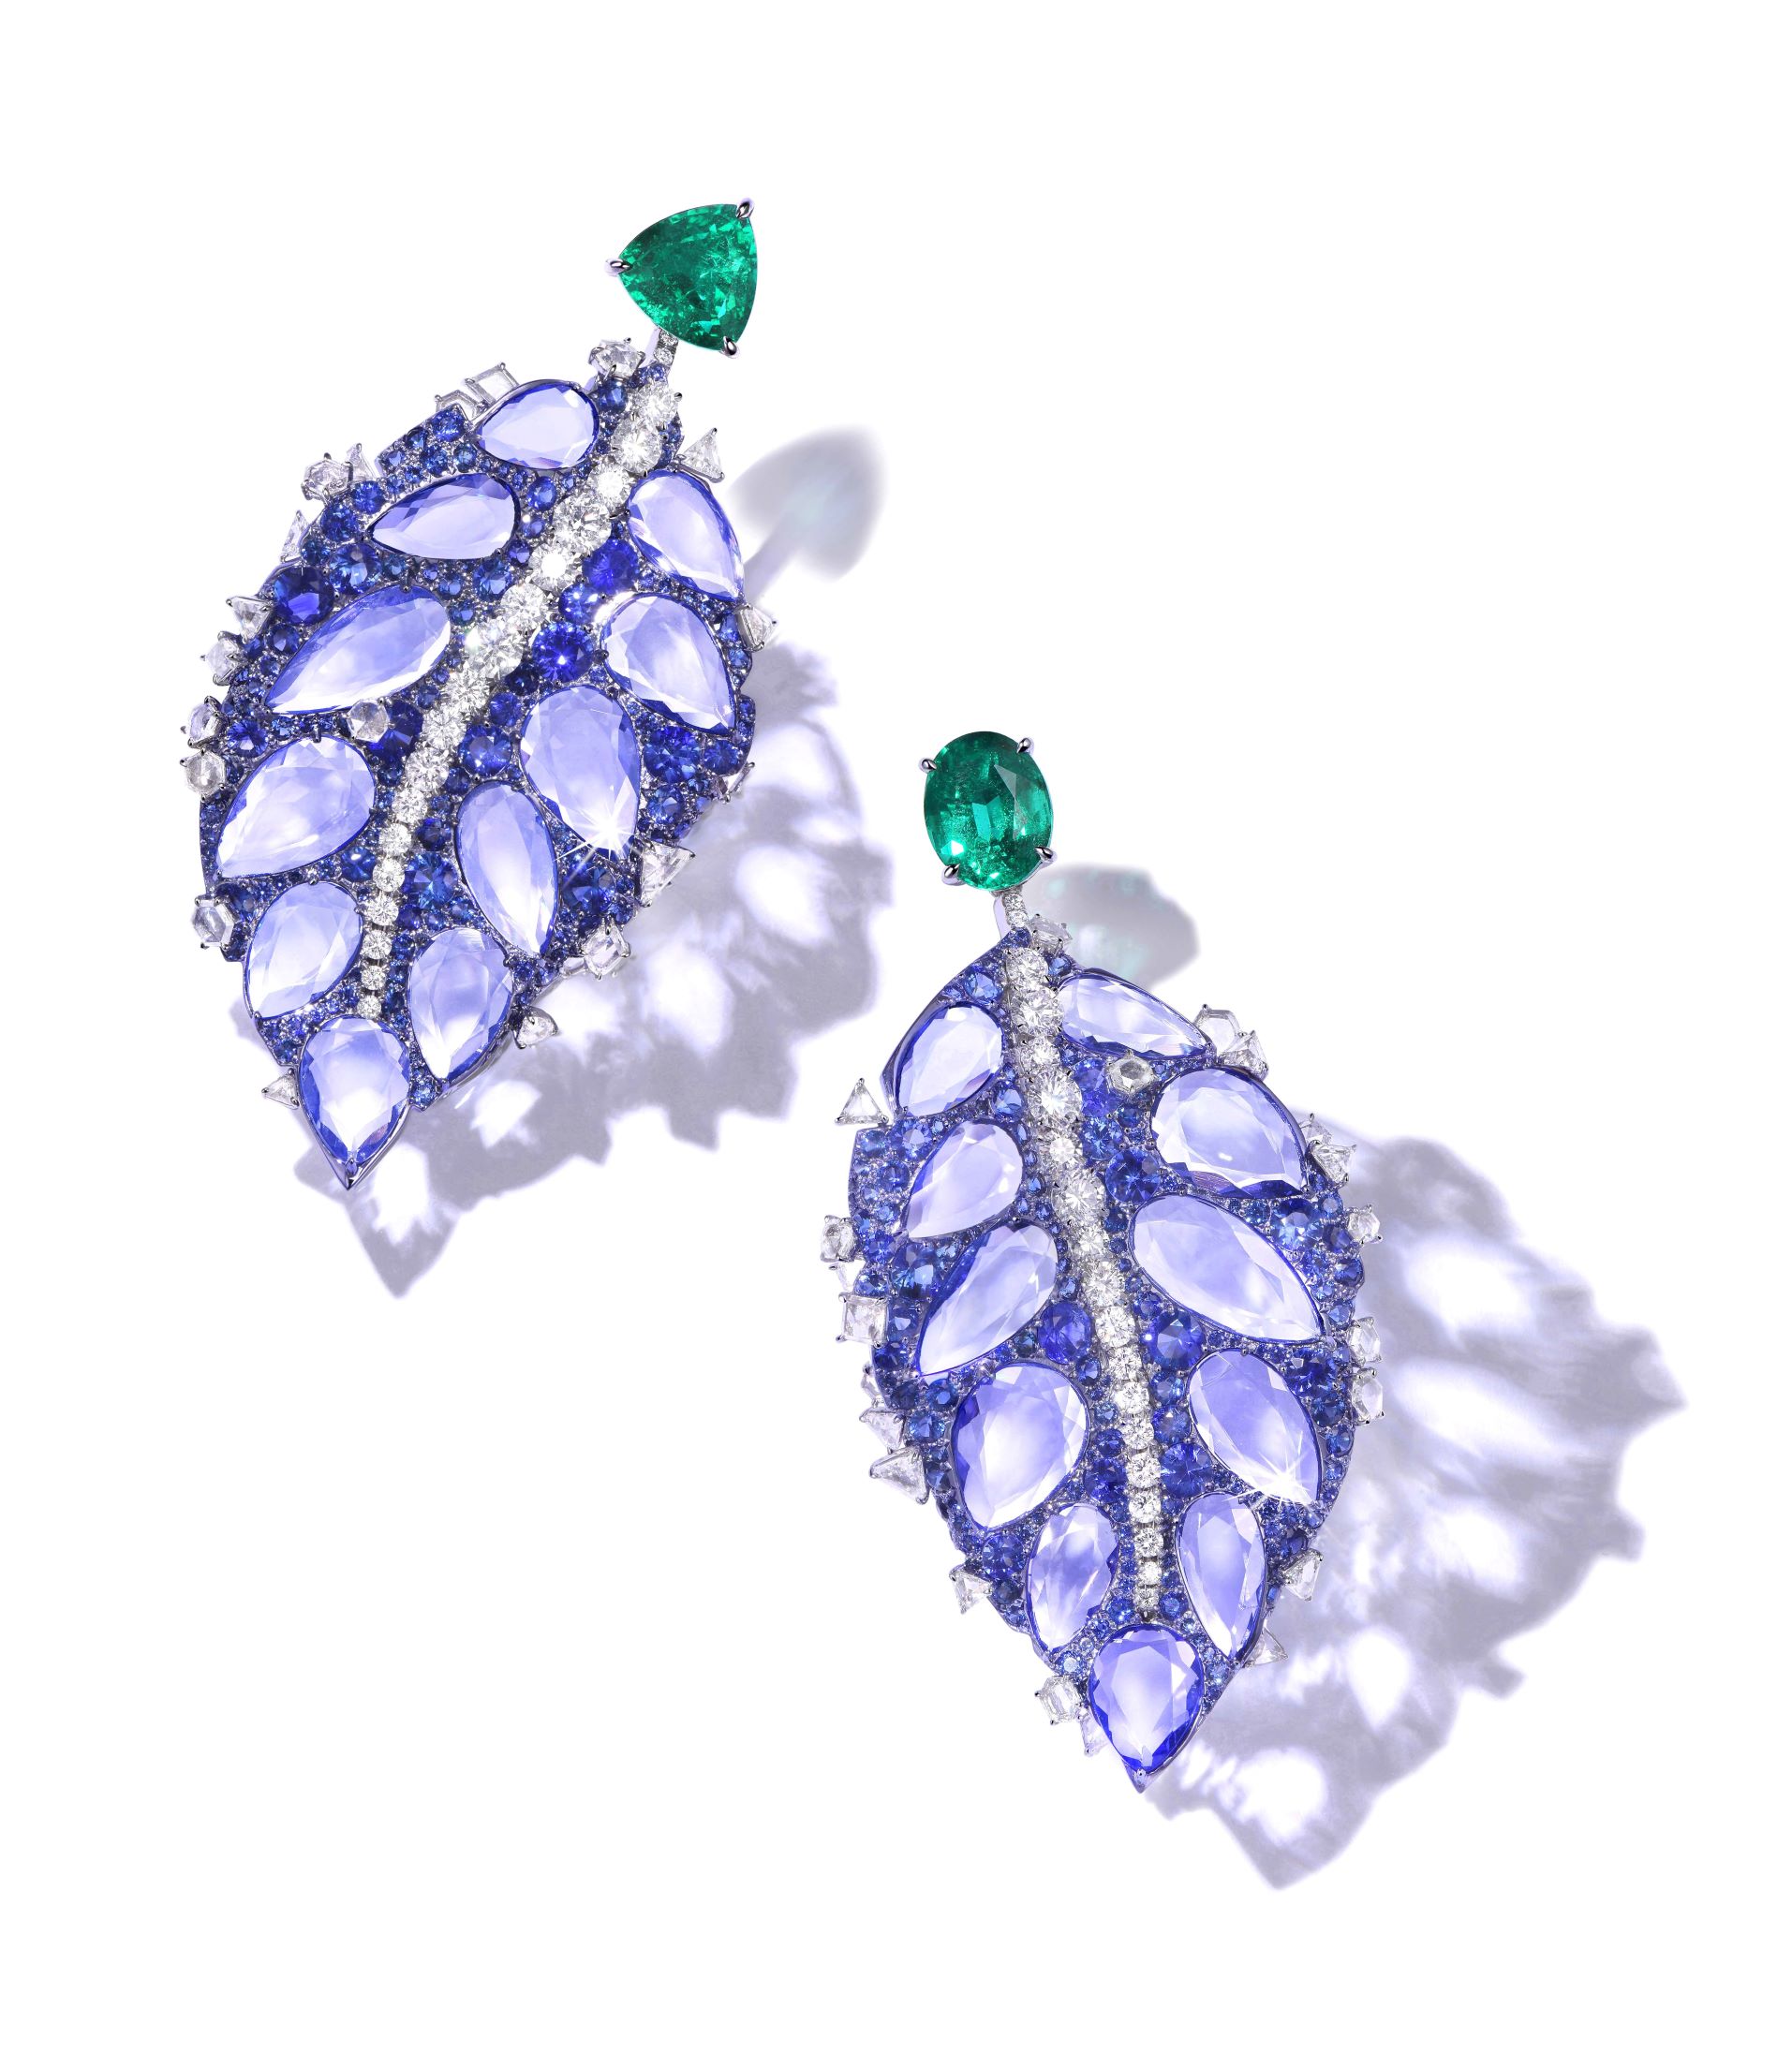 Blue Velvet Leaf Earrings  2.33ct Triangular Emerald and 2.09 ct emerald, double rose cut sapphires, tanzanites and irregular shaped diamonds. Image Courtesy of Feng J